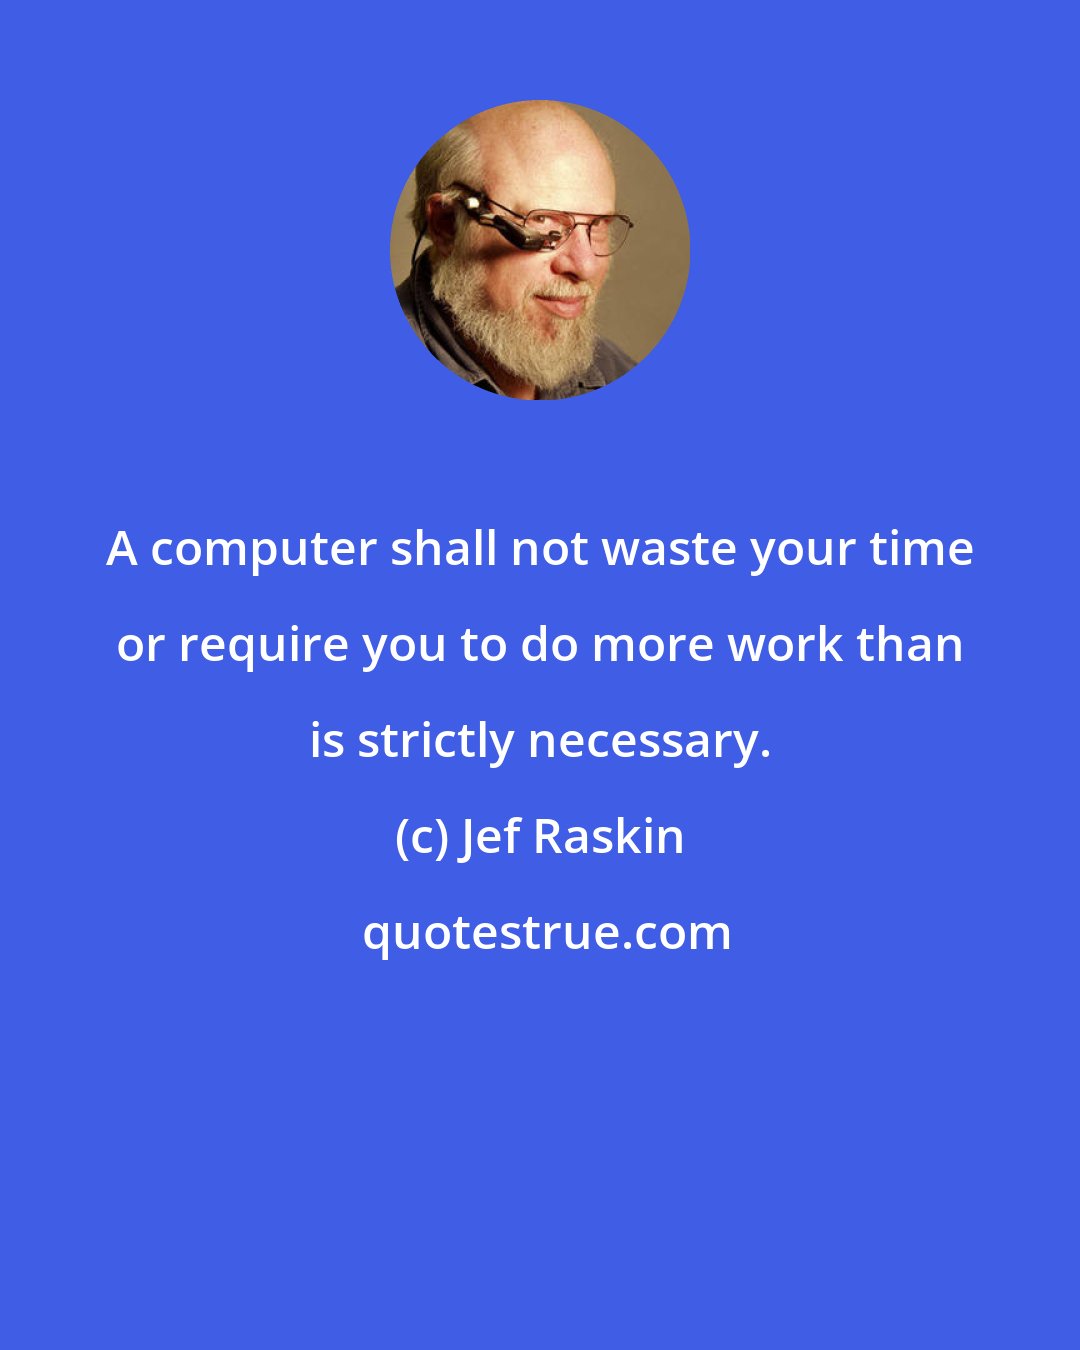 Jef Raskin: A computer shall not waste your time or require you to do more work than is strictly necessary.